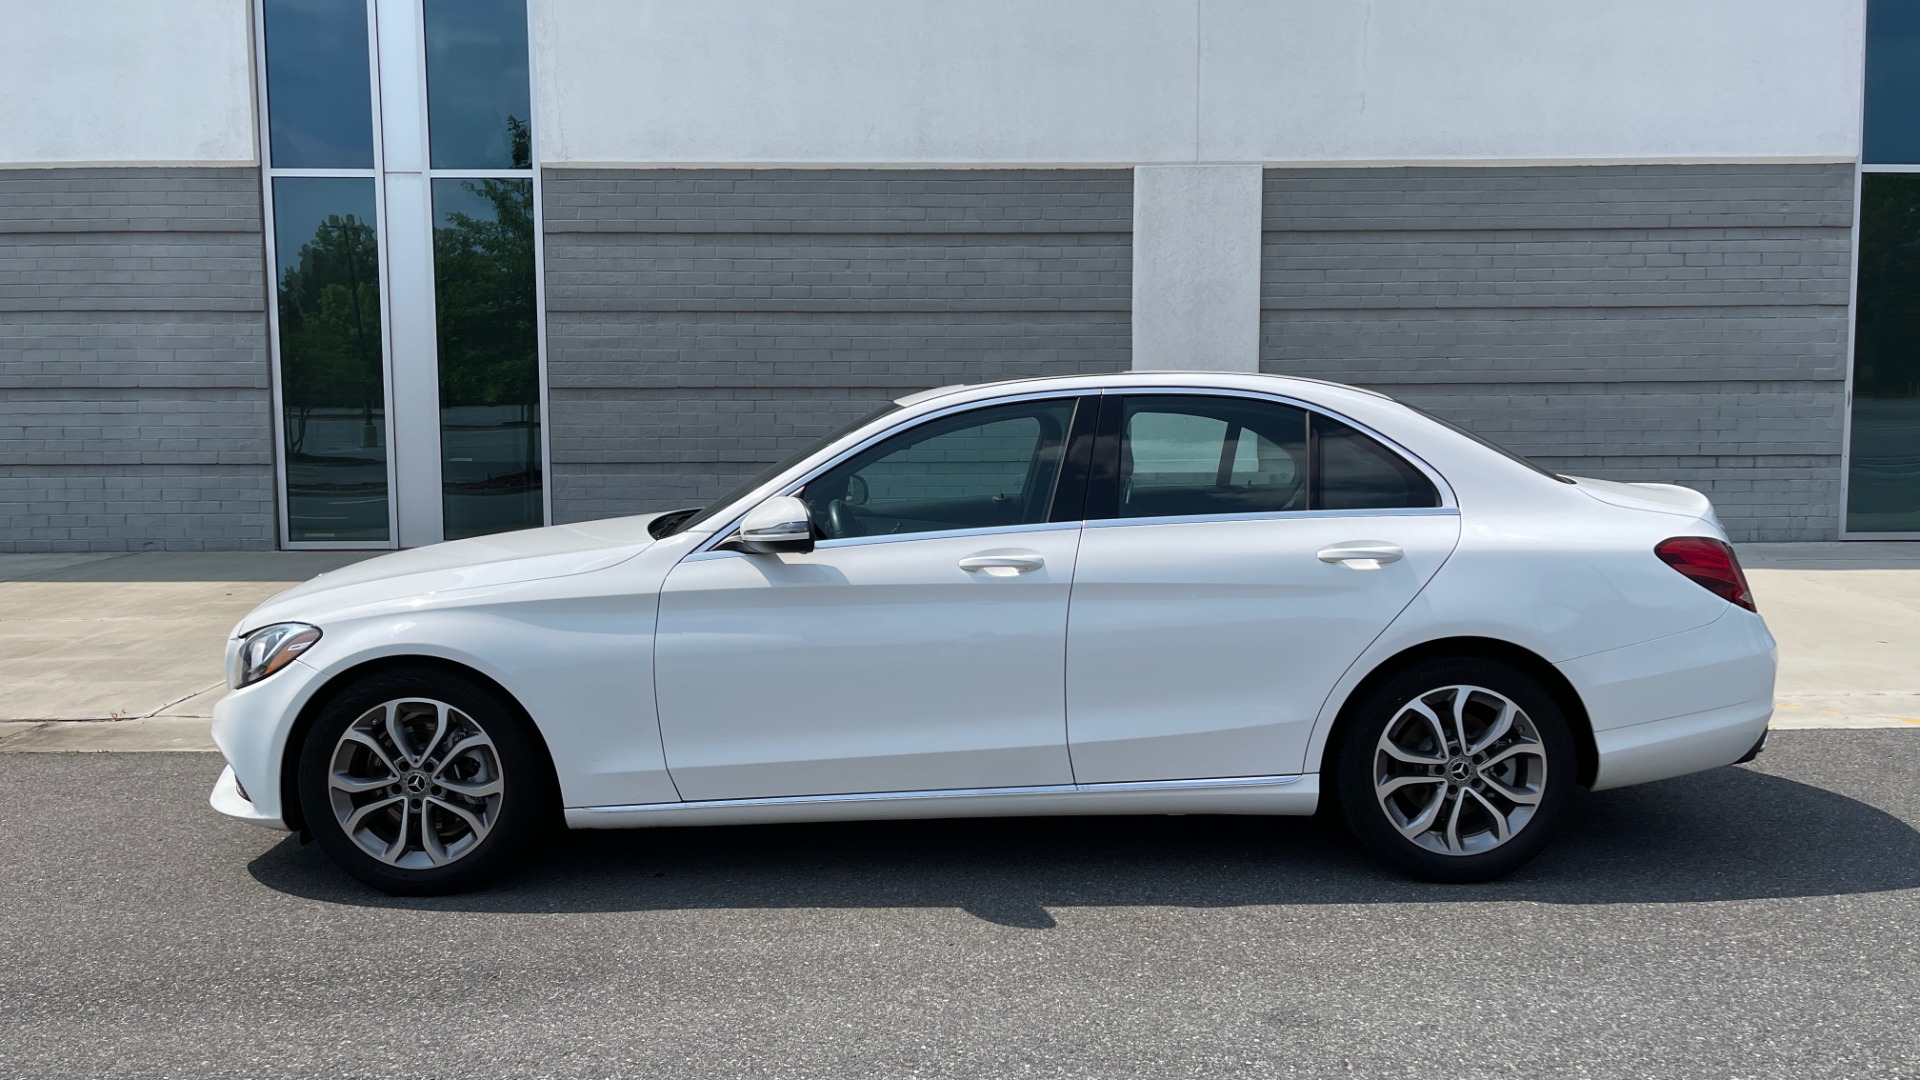 Used 2018 Mercedes-Benz C-CLASS C 300 / 2.0L / RWD / SUNROOF / APPLE~ANDROID / REARVIEW for sale Sold at Formula Imports in Charlotte NC 28227 4